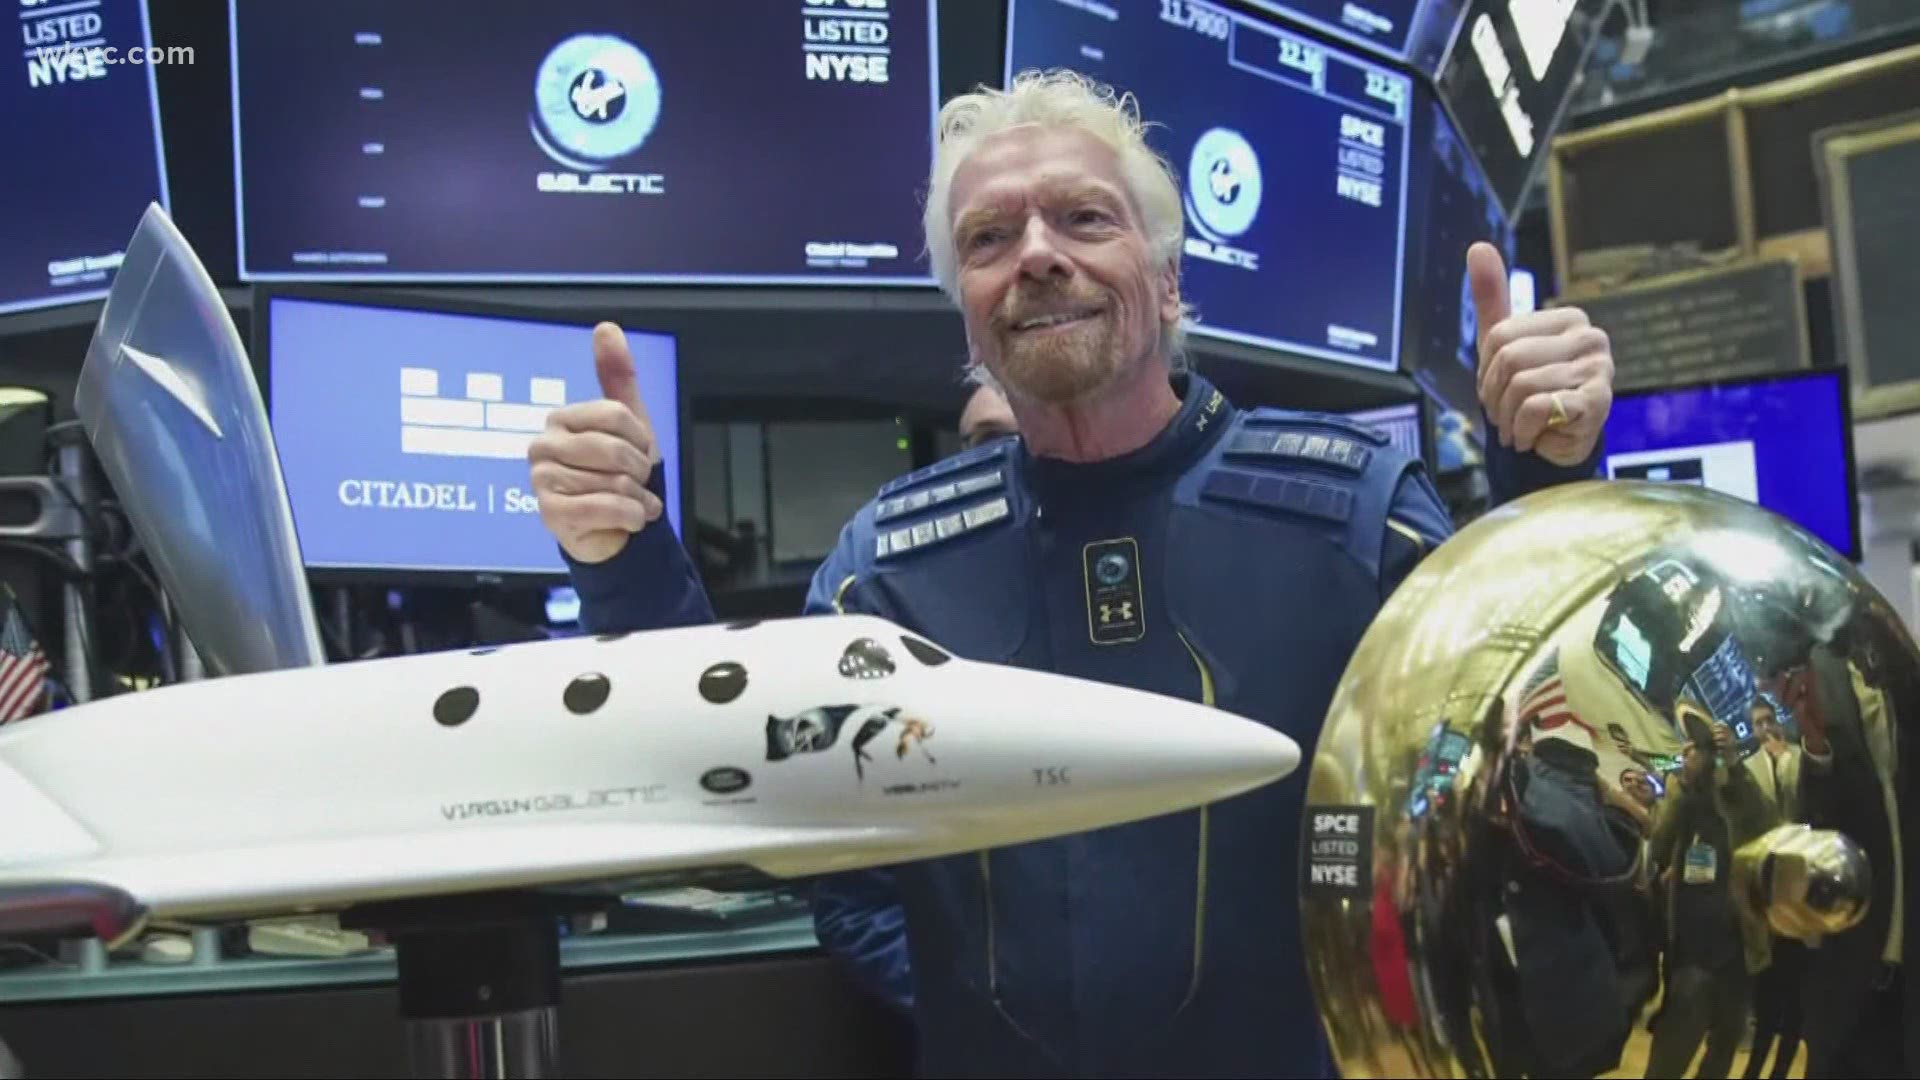 Billionaires like Richard Branson and Jeff Bezos are hoping to make space travel more common.